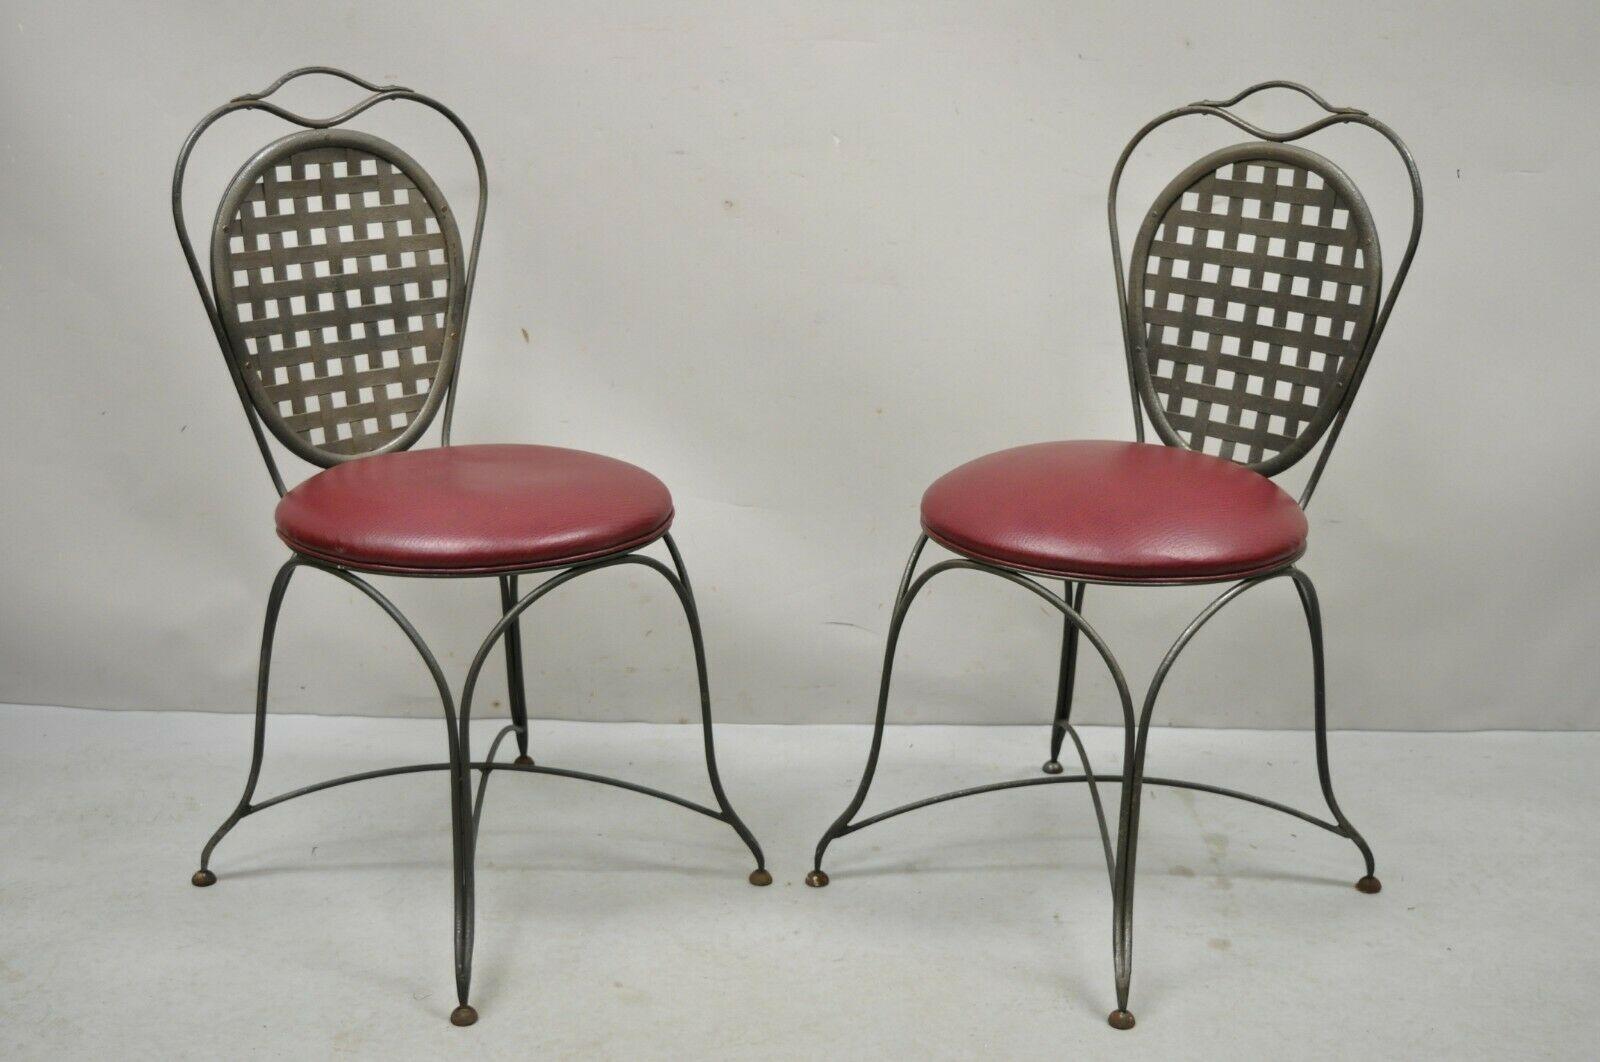 Italian Regency Style Wrought Iron Sunroom Lattice Round Seat Chairs, a Pair For Sale 7